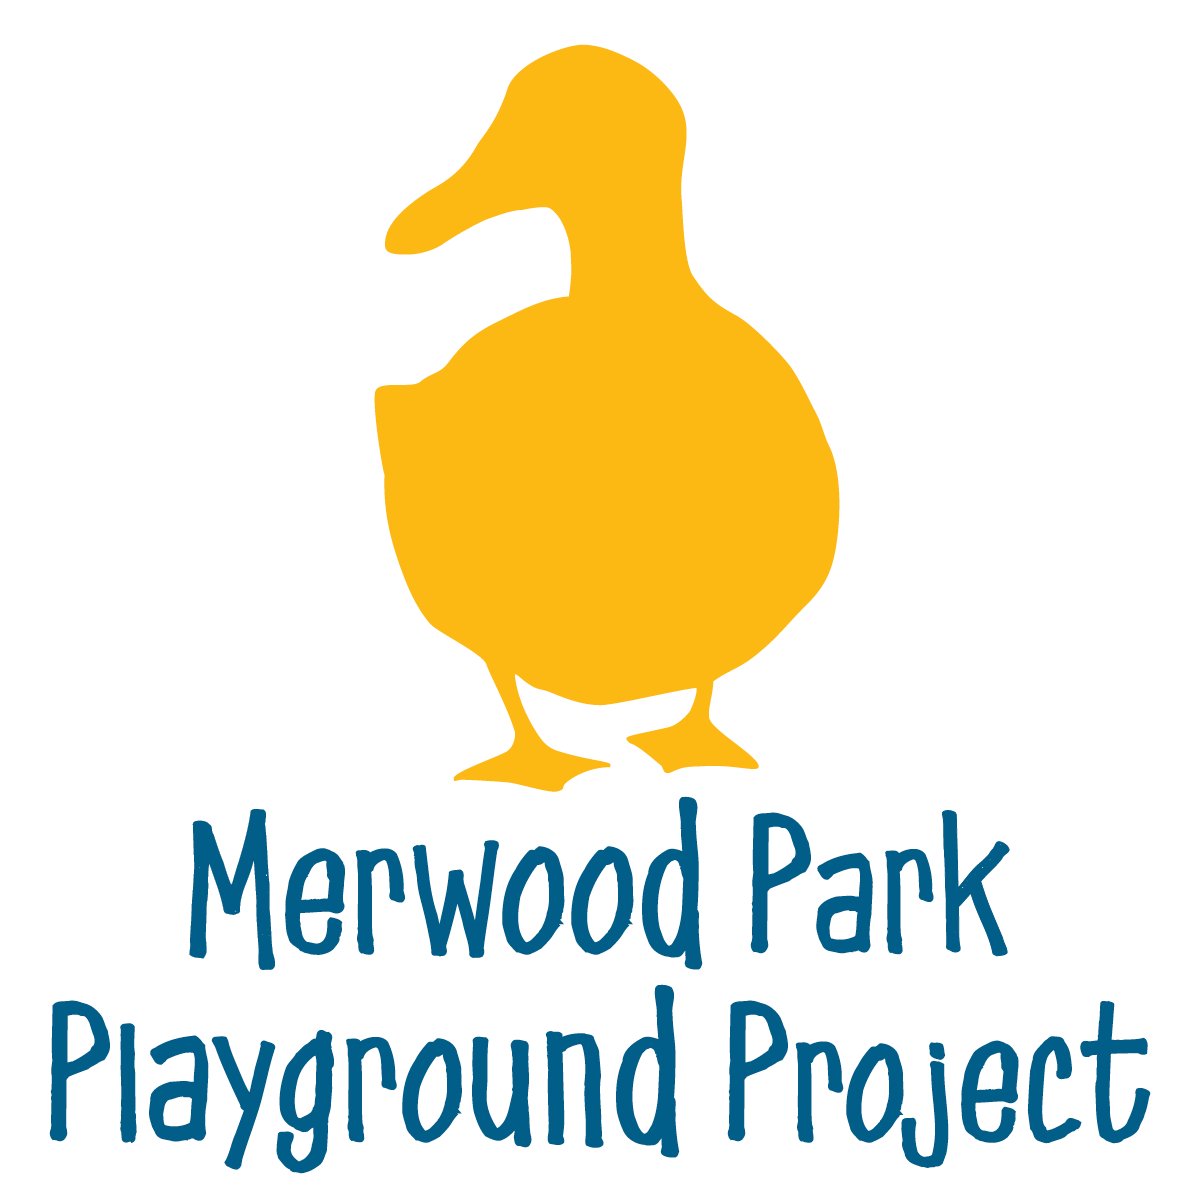 The Merwood Park Playground Project raises awareness and funding for new playground equipment at Merwood Park in Havertown, Pennsylvania.